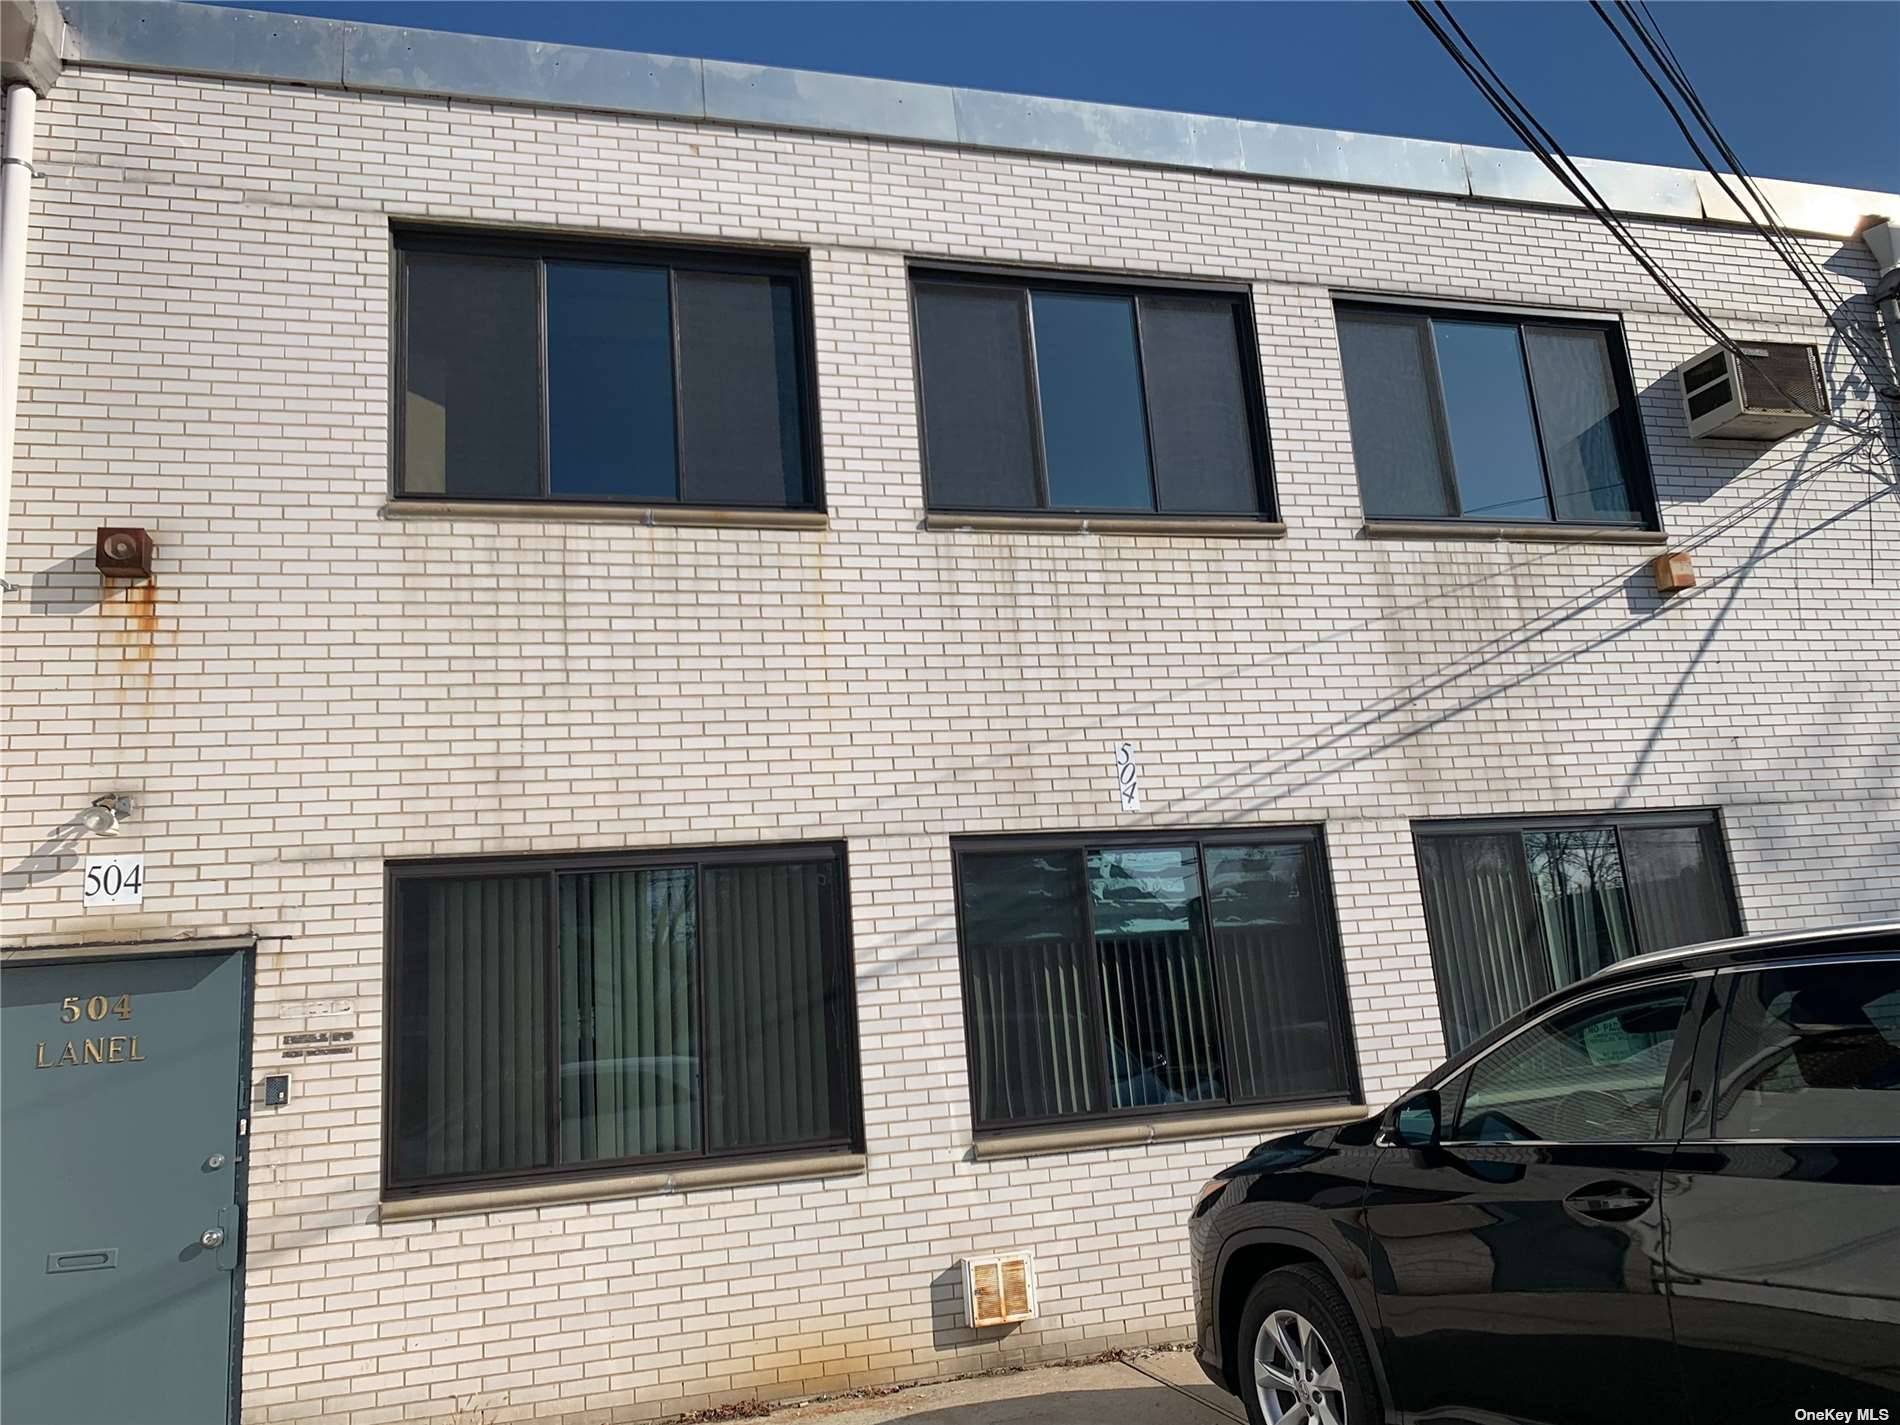 Space for rent 2nd floor 2000sq feet,, Can be used for Office space, Storage, or Ware house Light Industrial Building, Large Office Building, New heating amp ; cooling System.